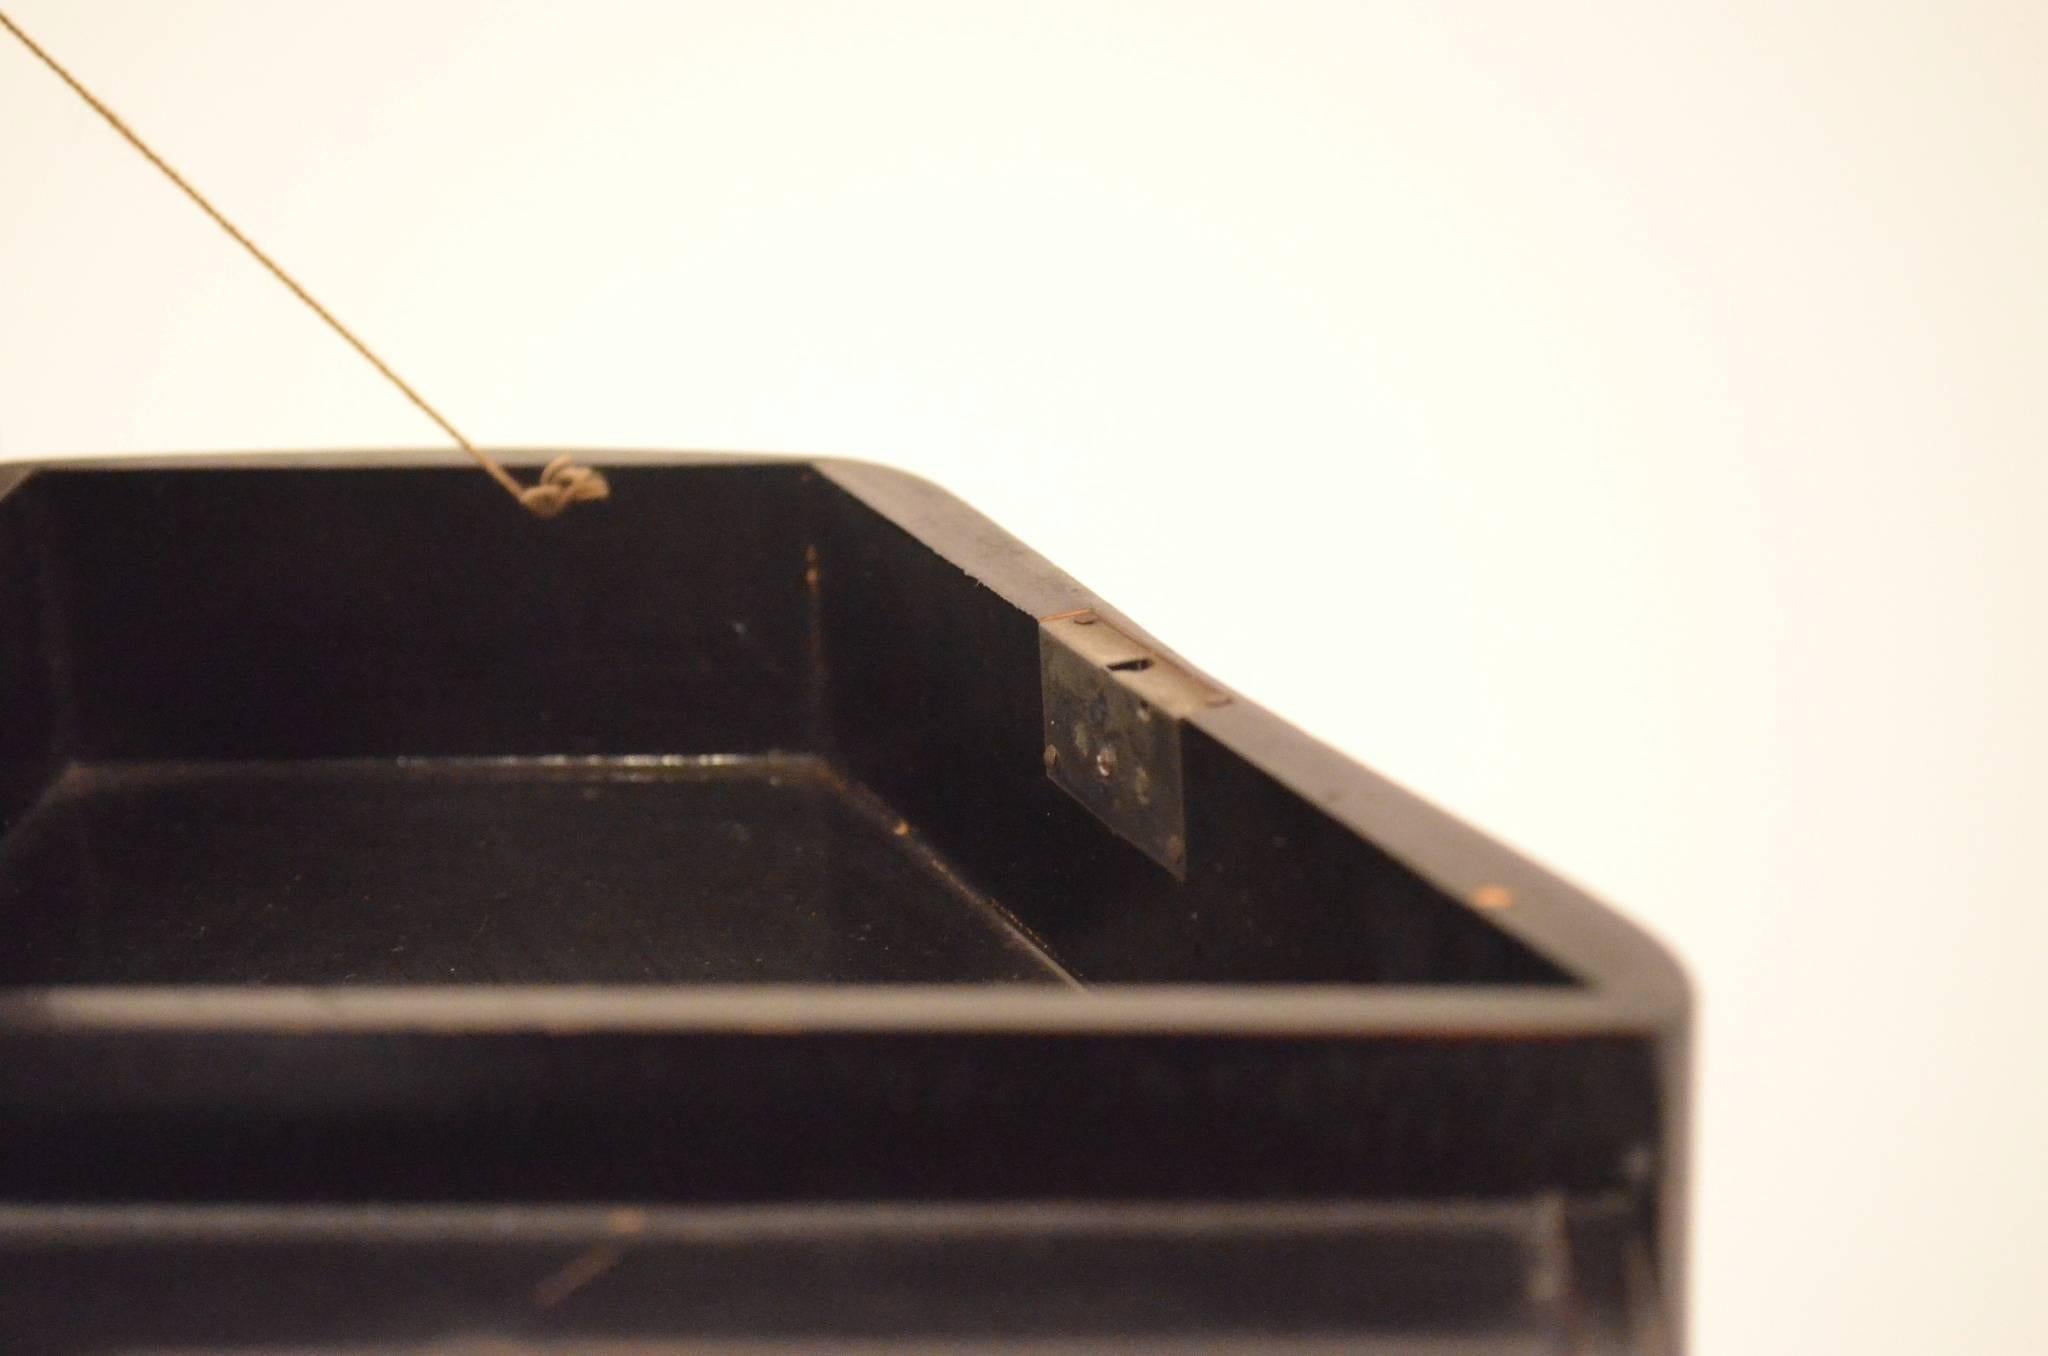 Early 20th Century 1920s Art Deco Black Lacquered Wooden Piano Shaped Jewelry Box For Sale